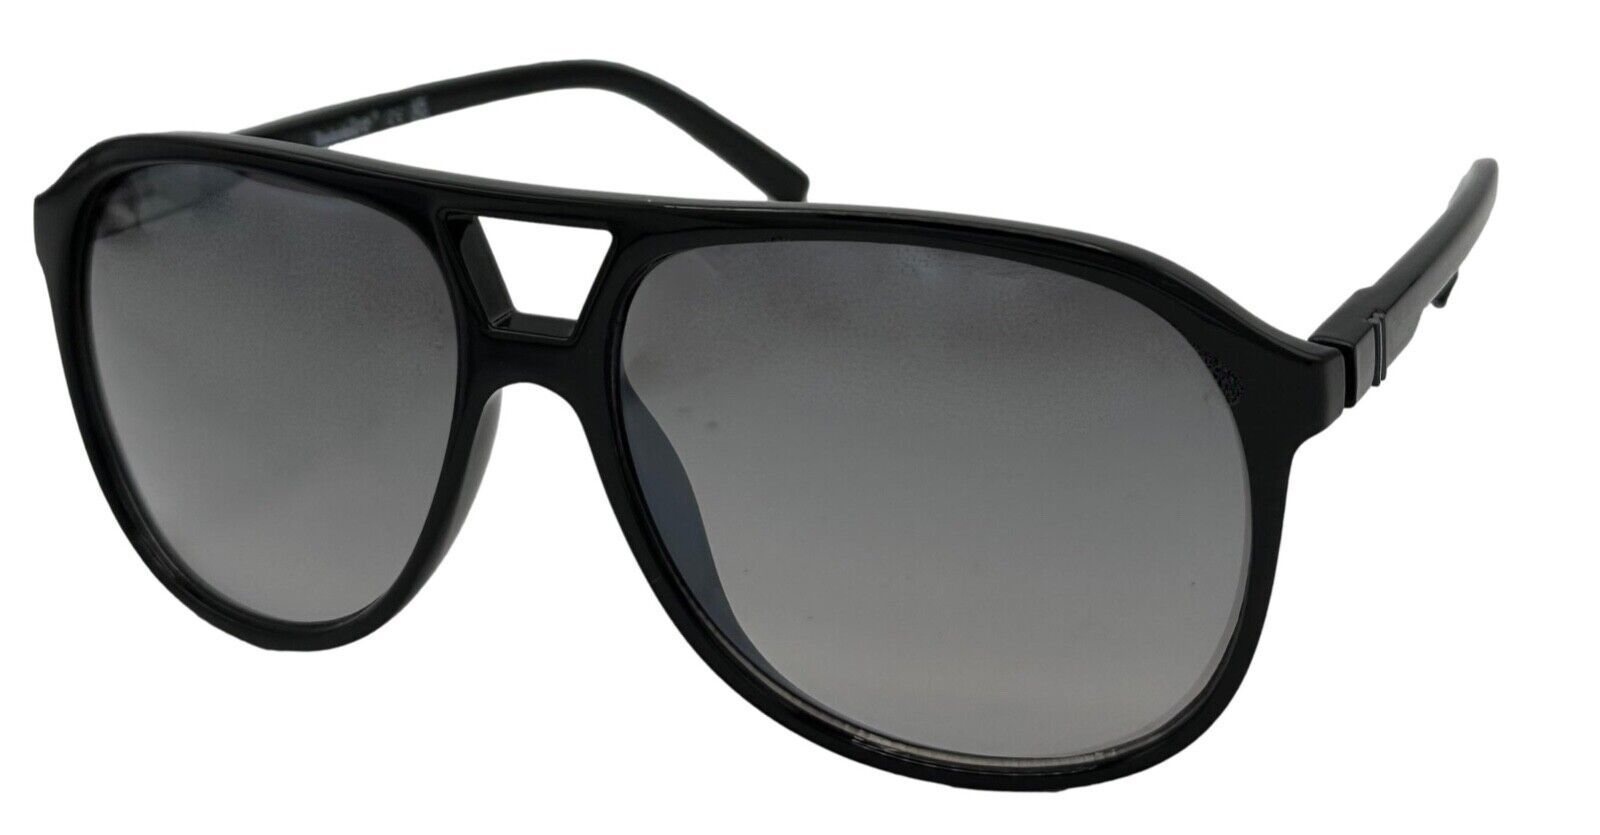 Primary image for Timberland Sunglass Mens Shiny Black Rectangle Plastic, Gradient Lens TB7273. 1B